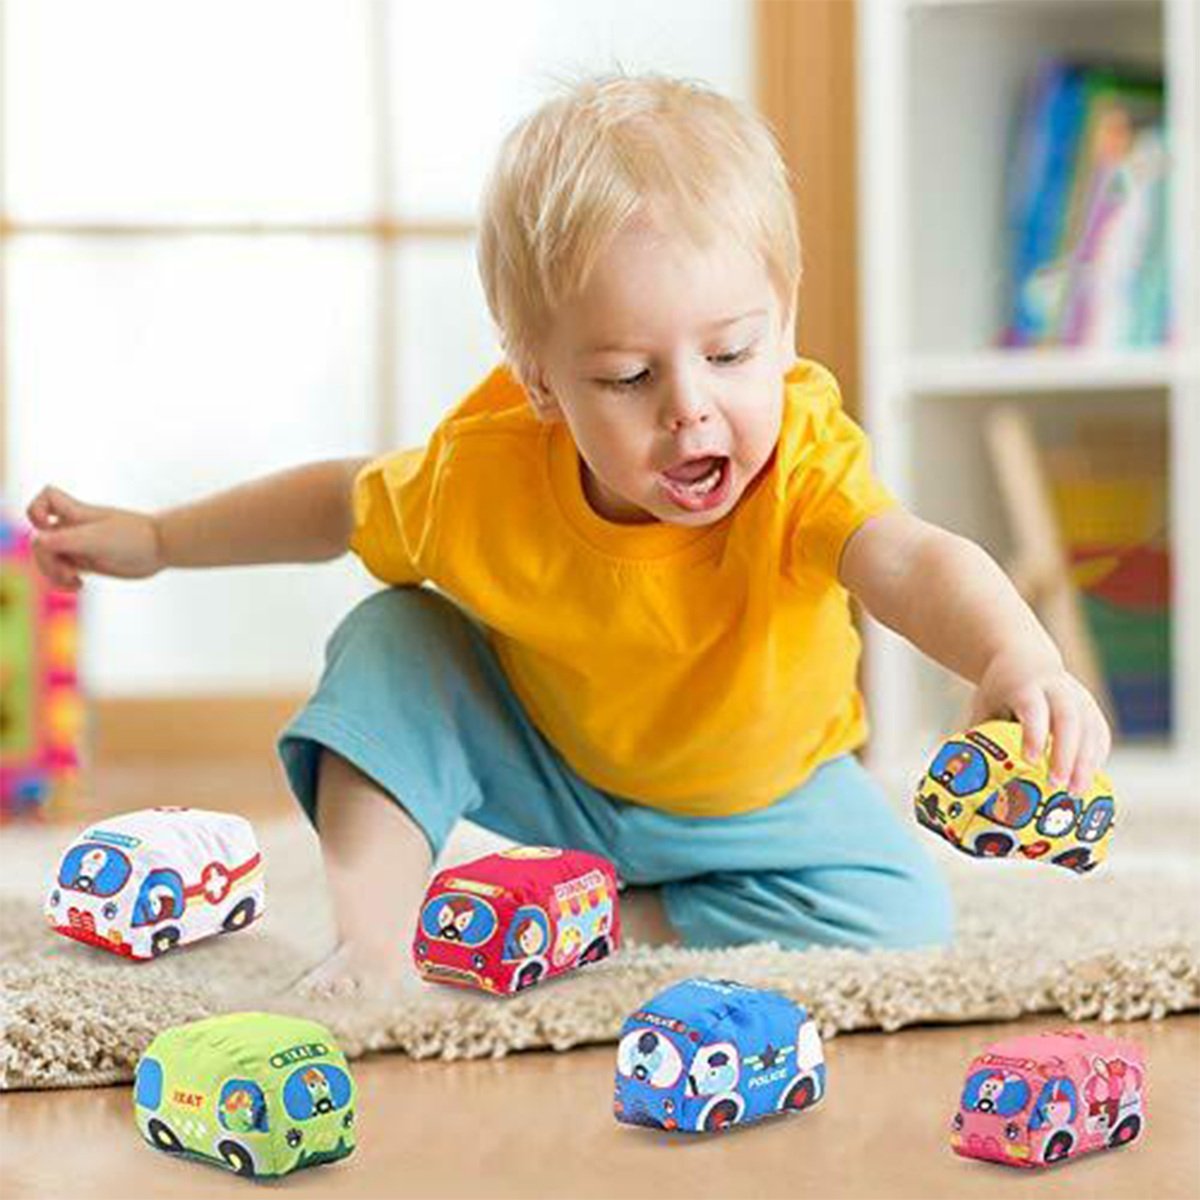 Huanger  Soft Cloth Toy Cars HE0252